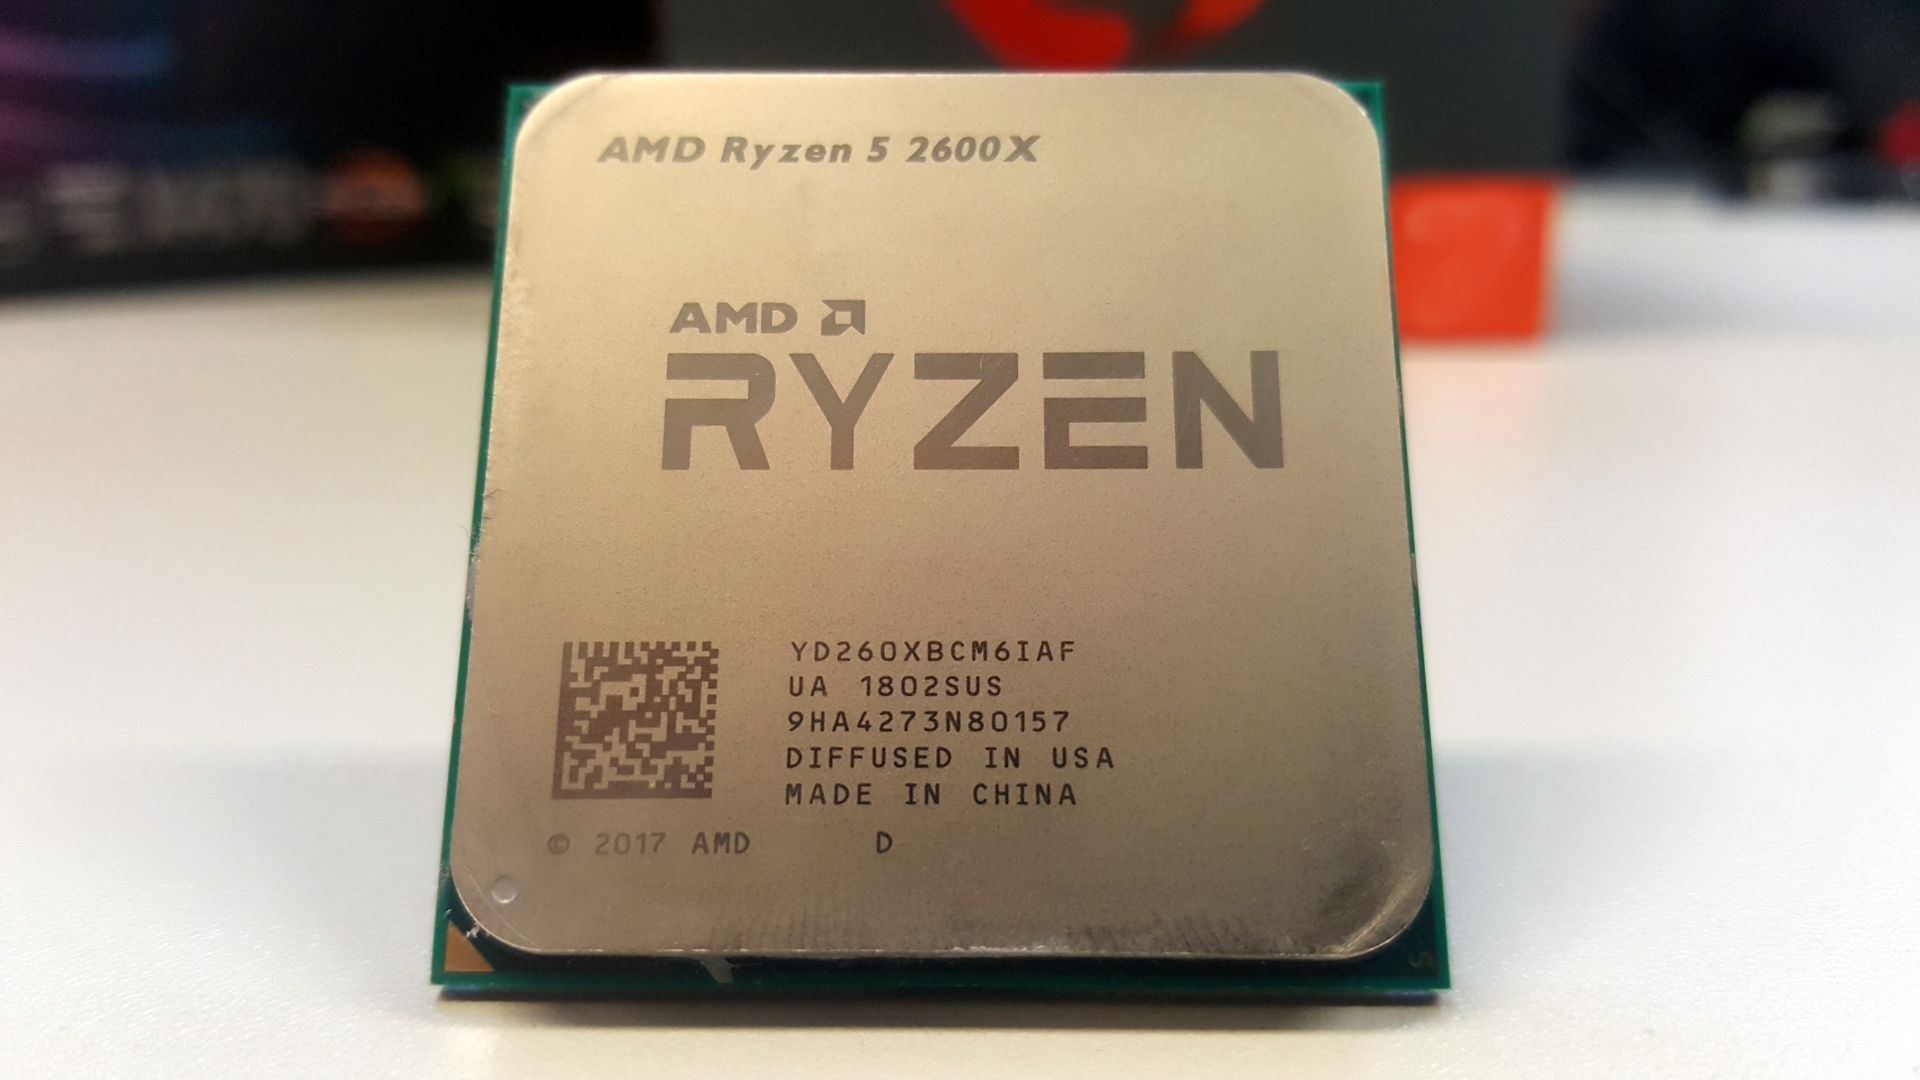 AMD Ryzen 5 2600X a CPU that deserves to be the heart your next gaming rig | PCGamesN